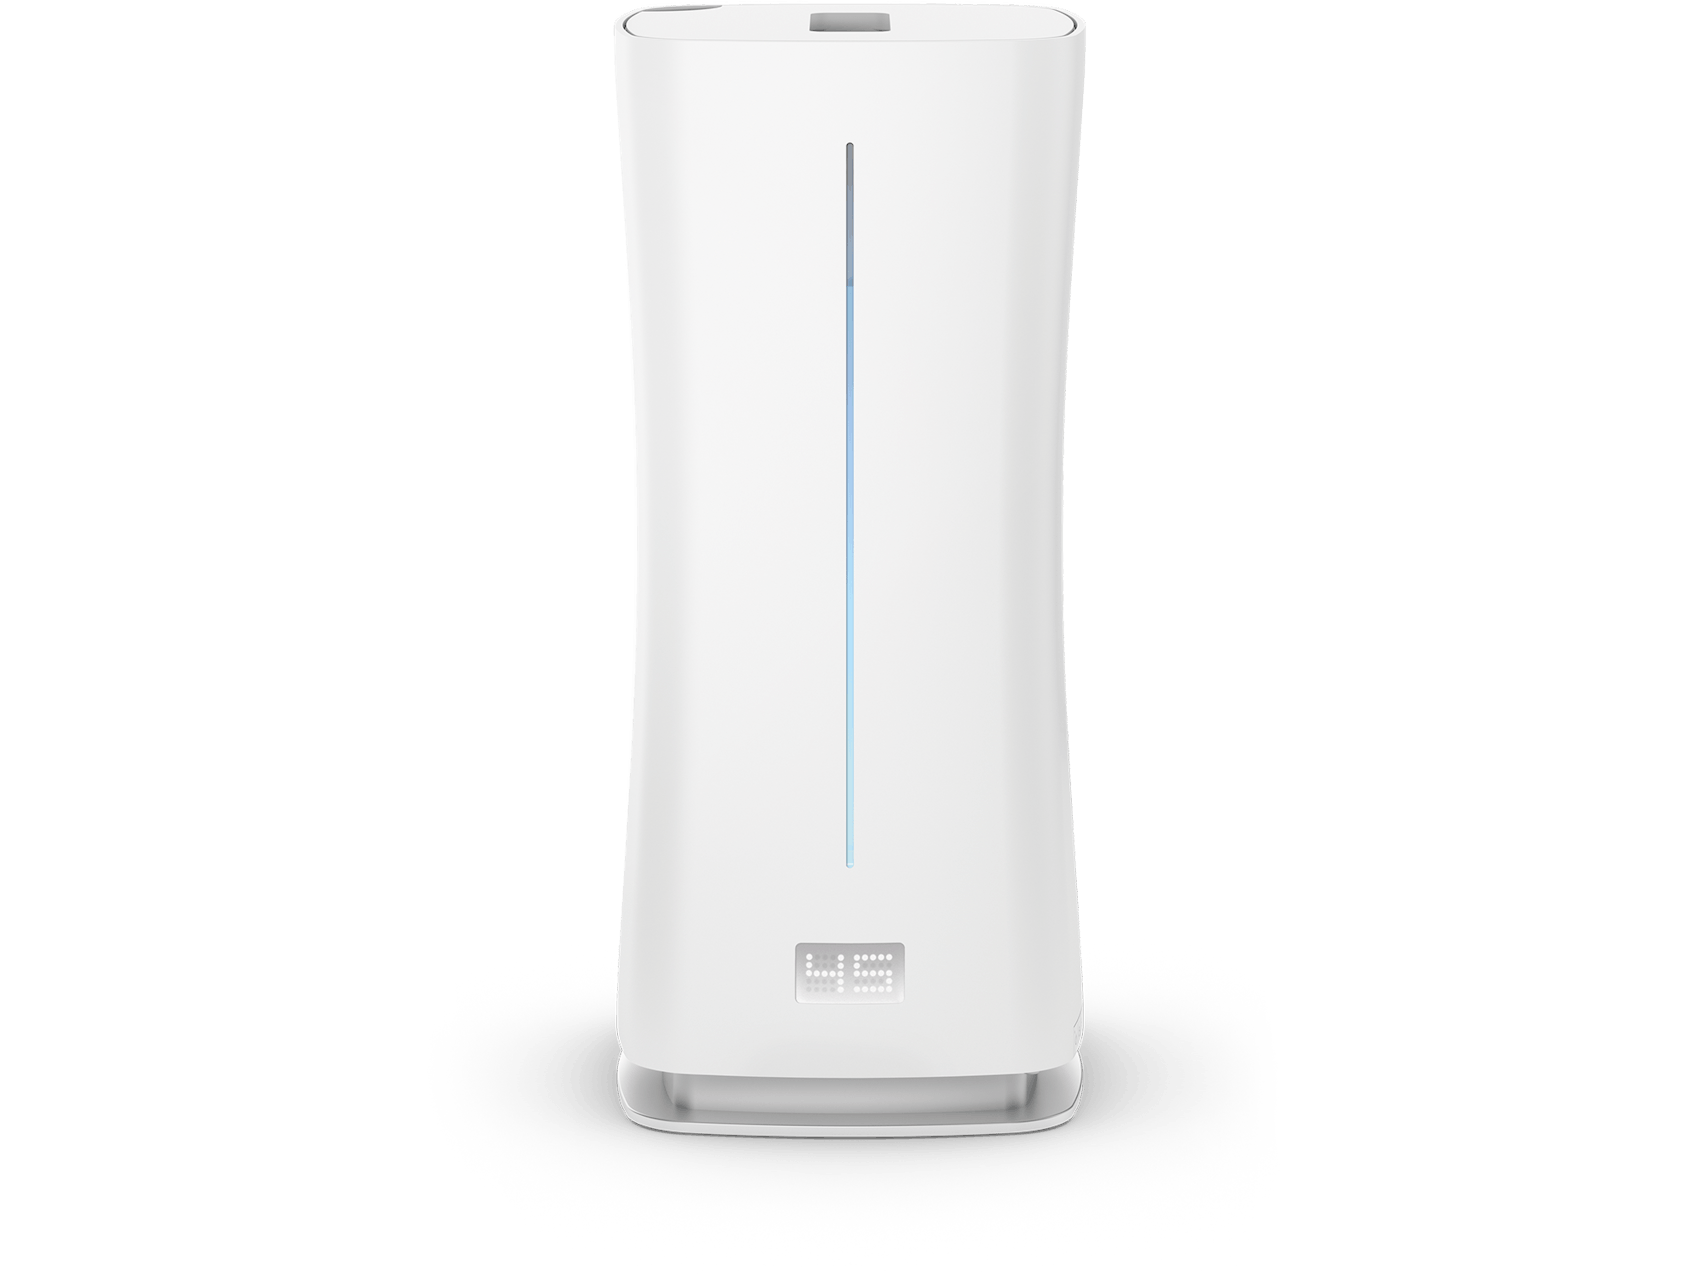 Eva little humidifier by Stadler Form in white as front view